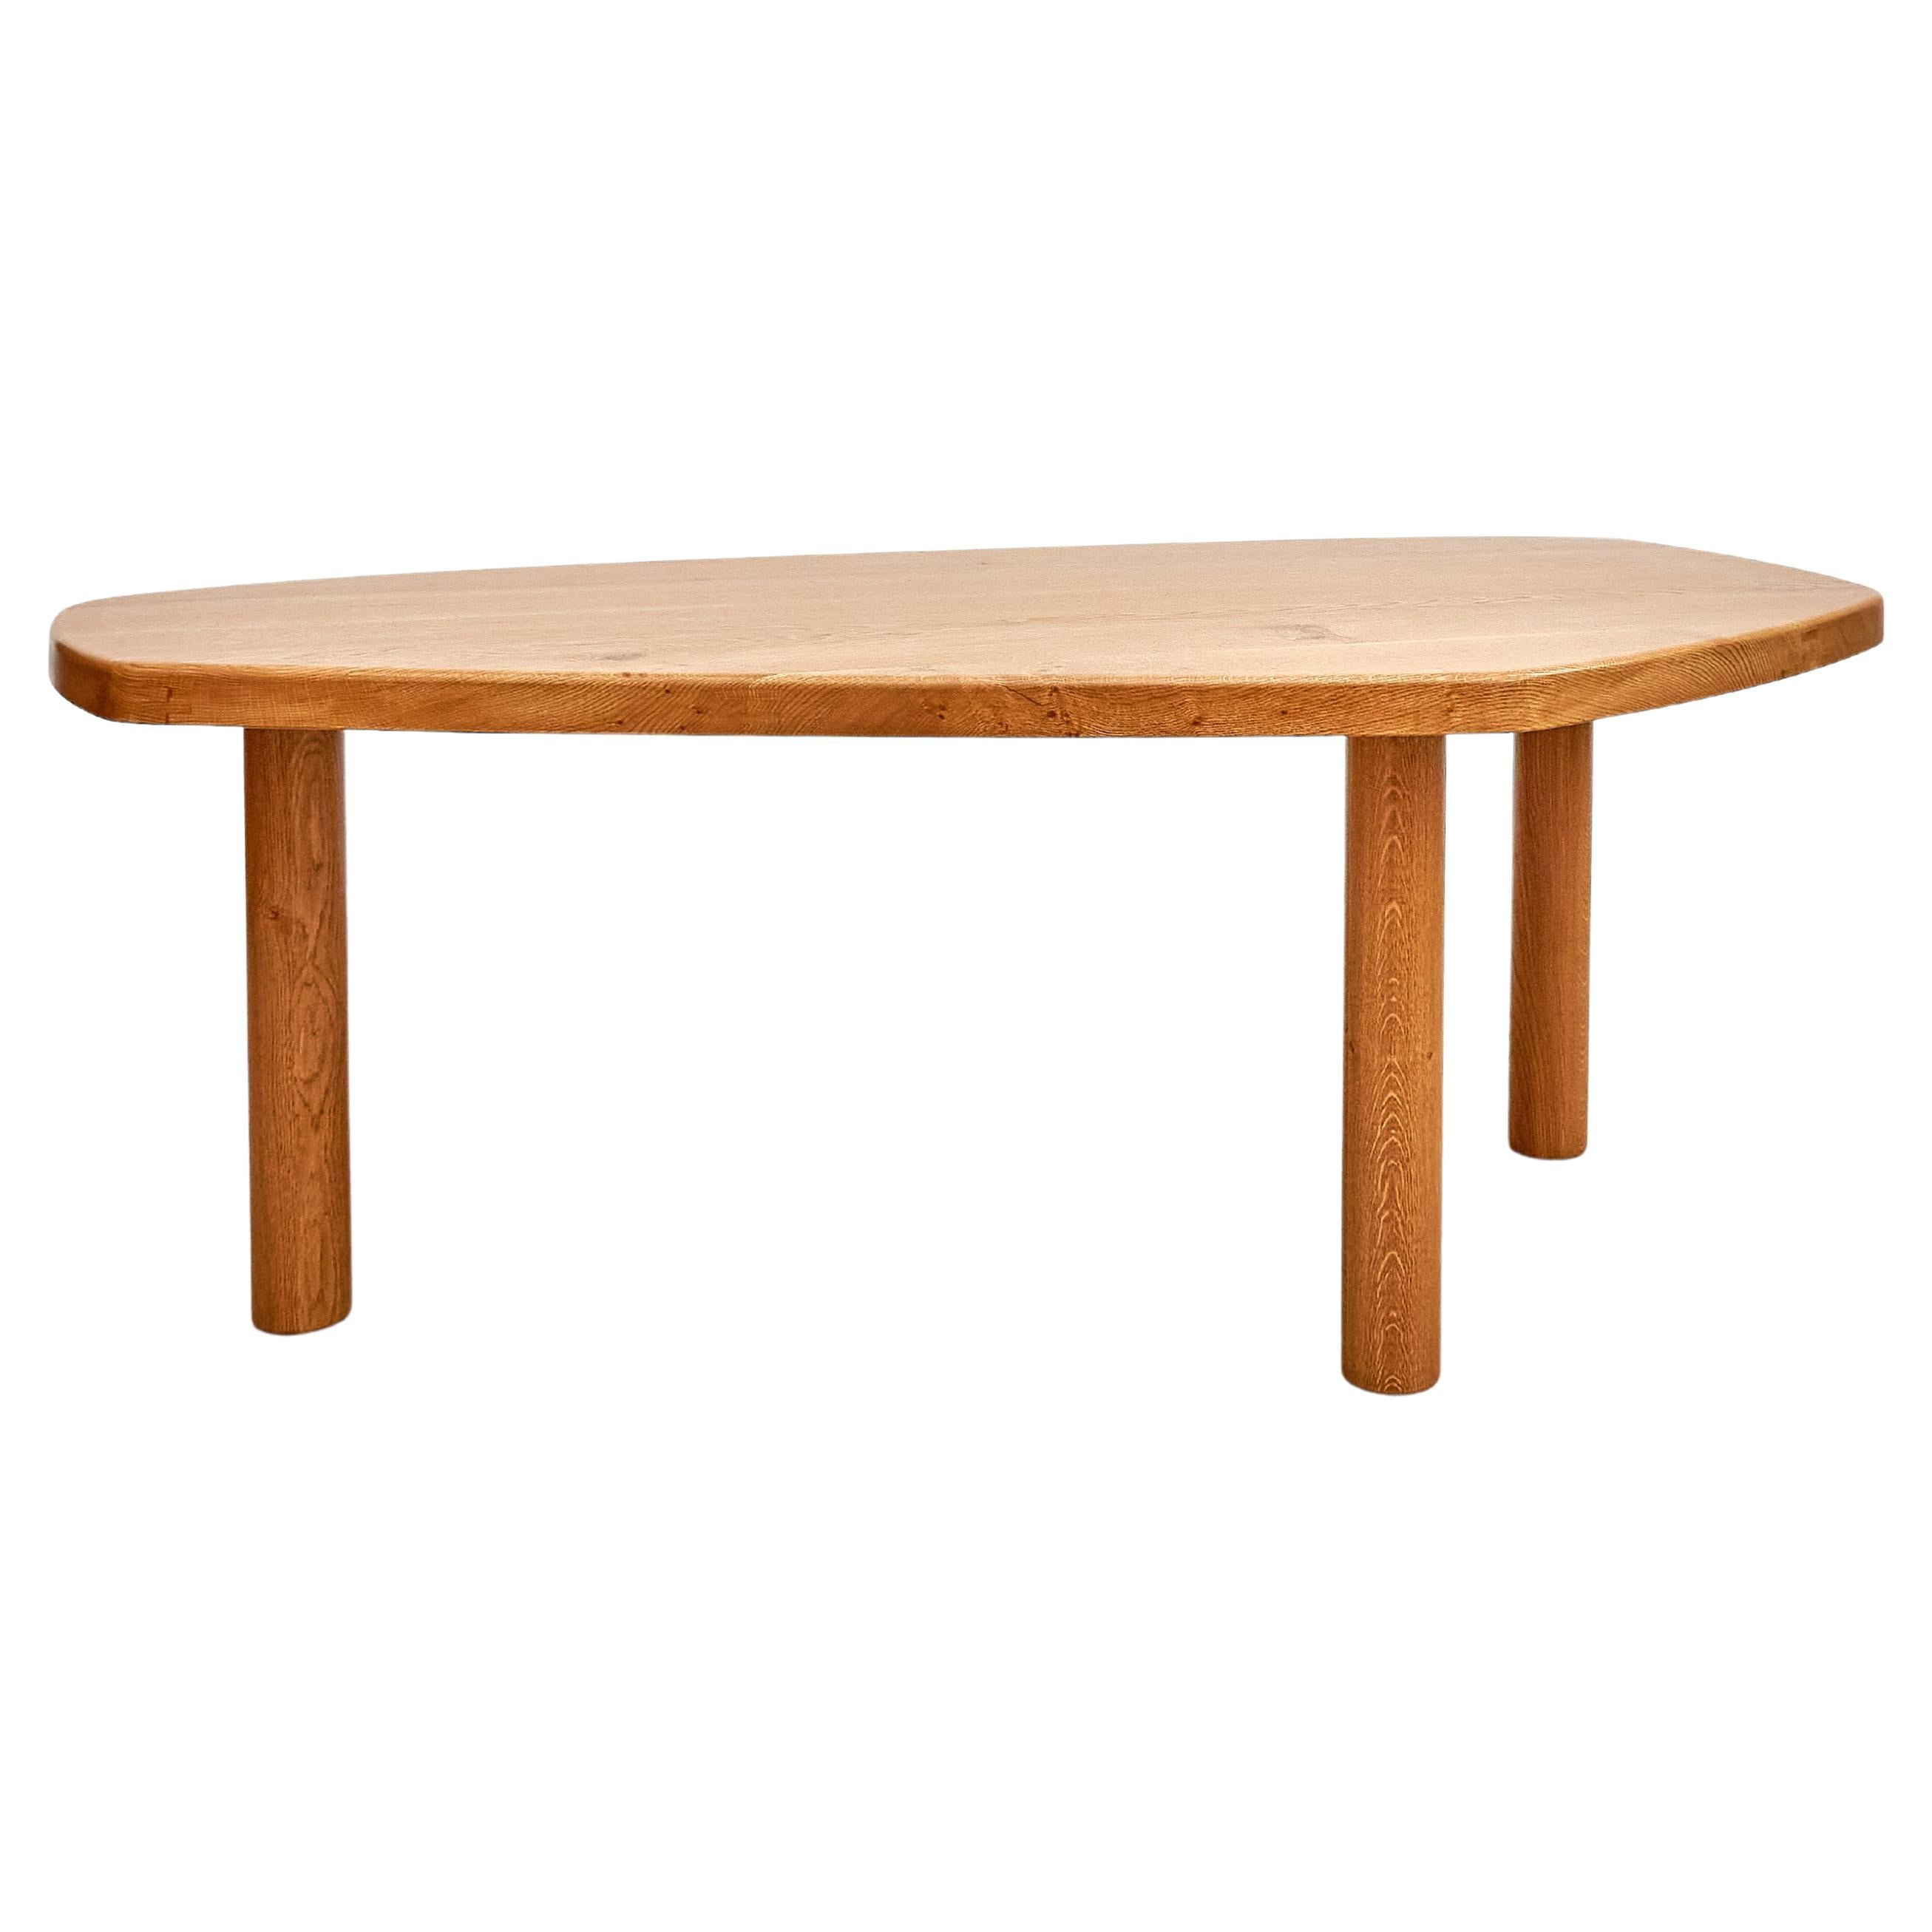 Contemporary Dada Est. Oak Table - Artisan Crafted with Midcentury Design Charm For Sale